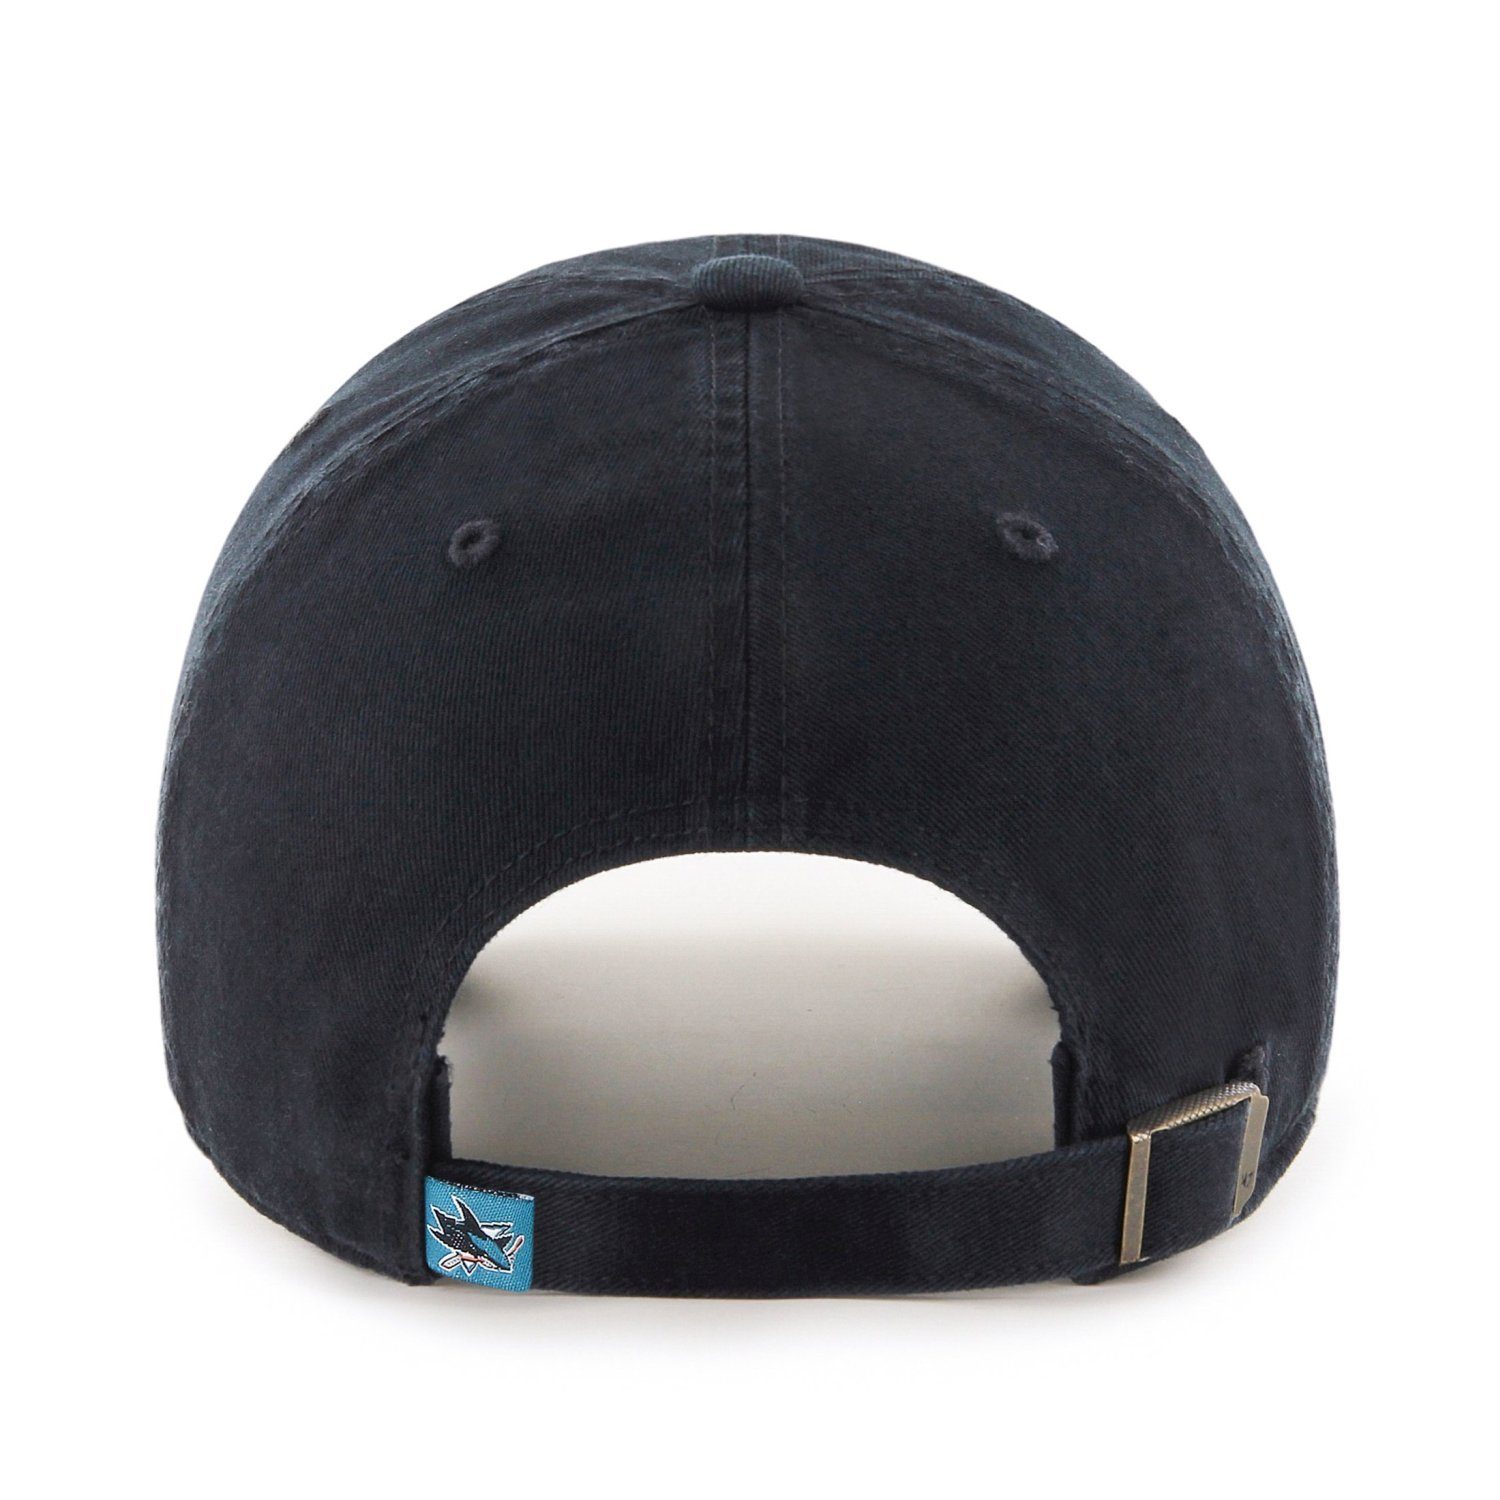 Cap Relaxed San '47 CLEAN Brand UP Fit Sharks Jose Trucker